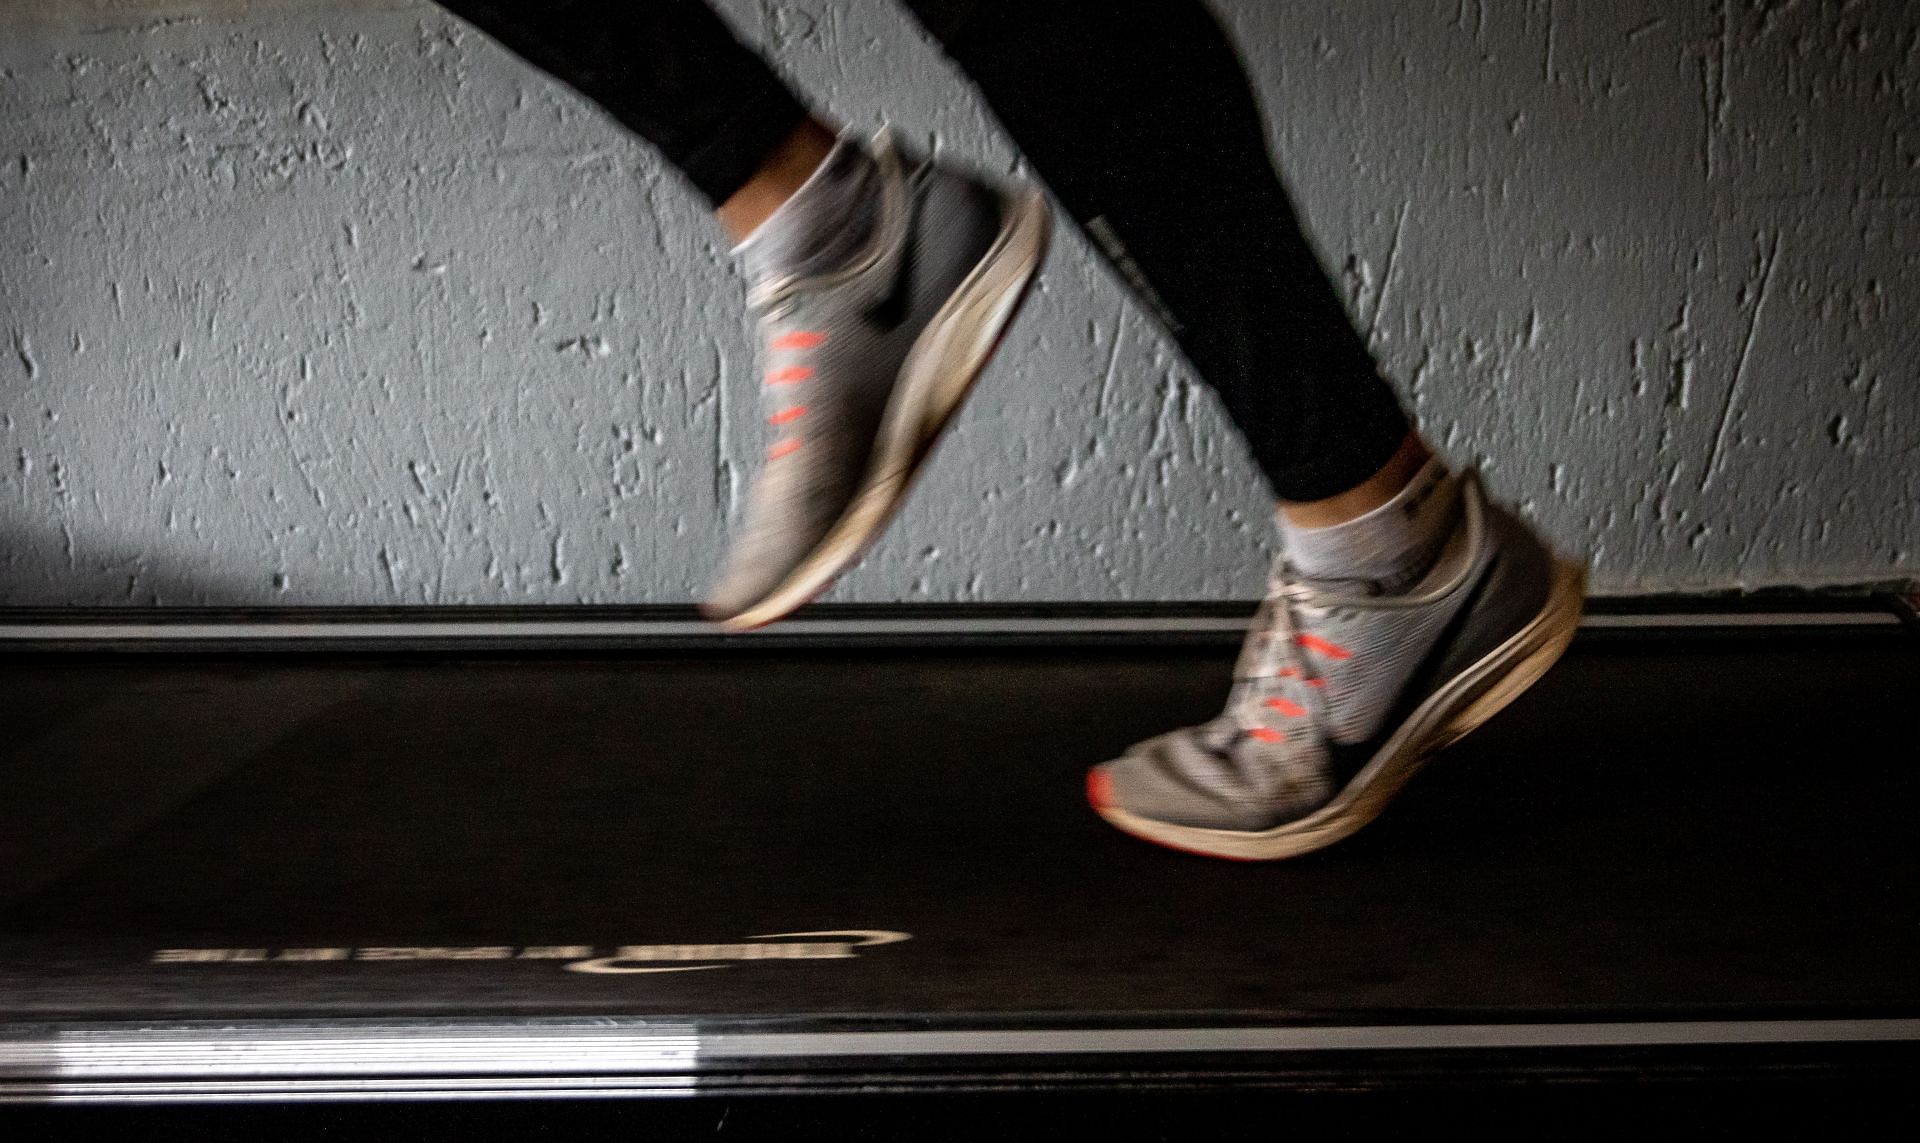 An ideal workout equipment if you like to jog or run. (Image by Magda Ehlers / Pexels)